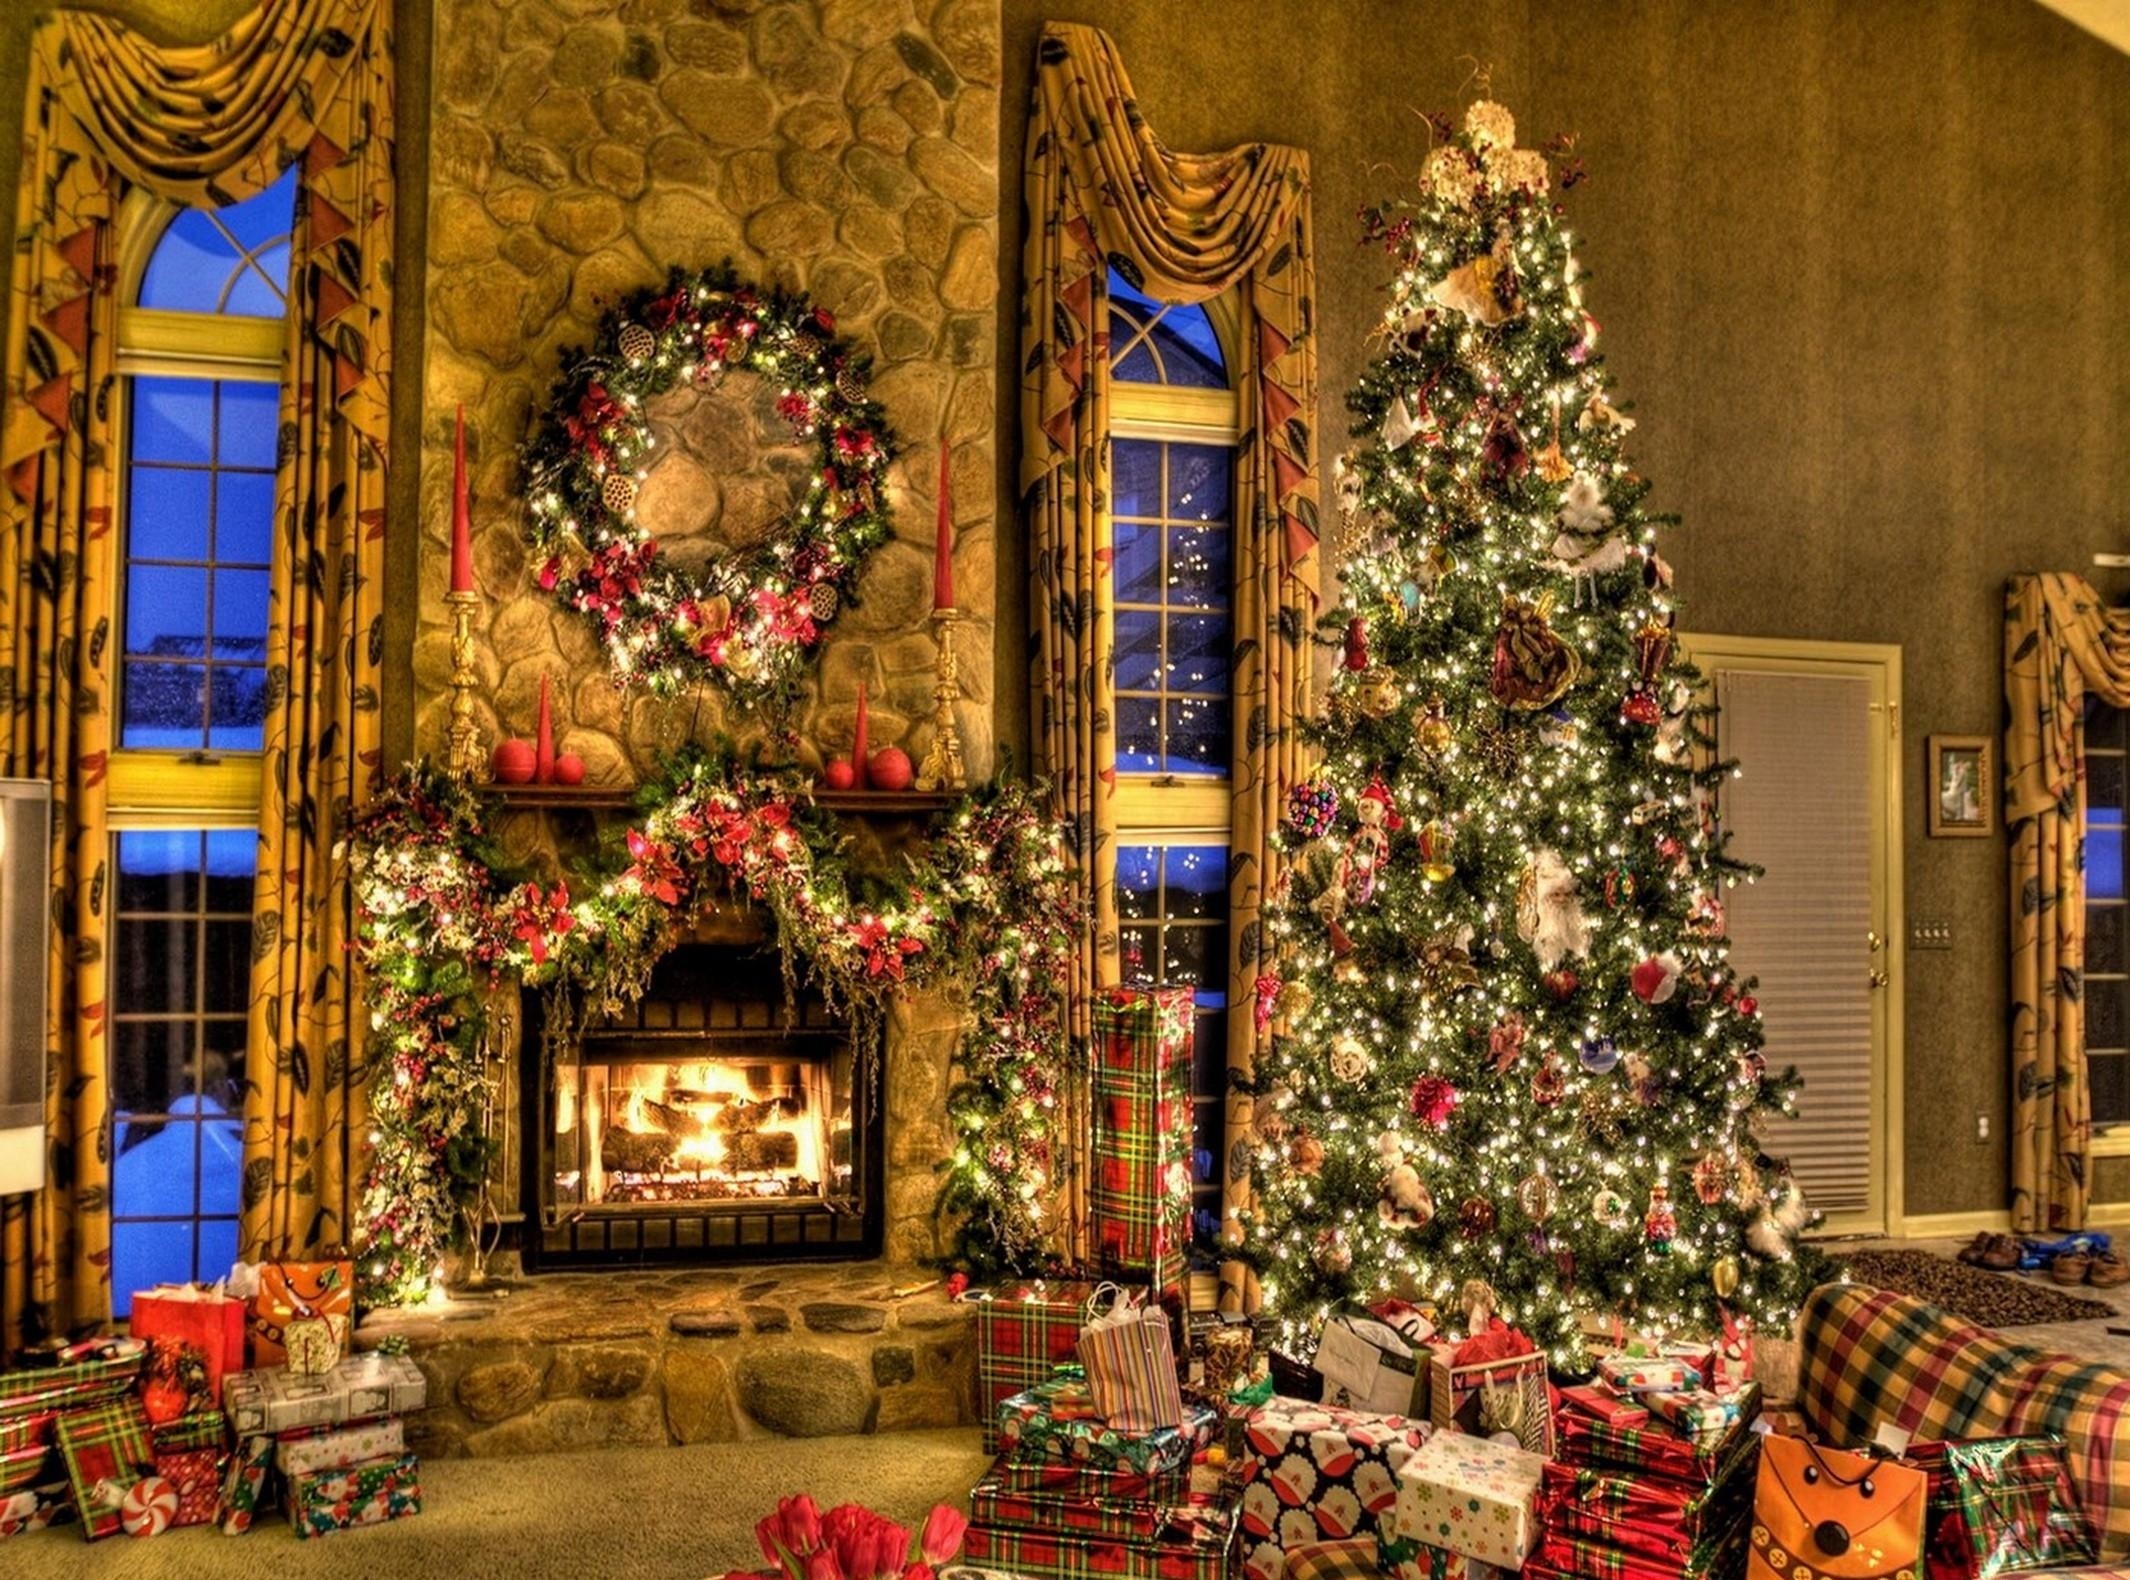 2130x1580 1024x768 A Country Christmas desktop PC and Mac wallpaper ...